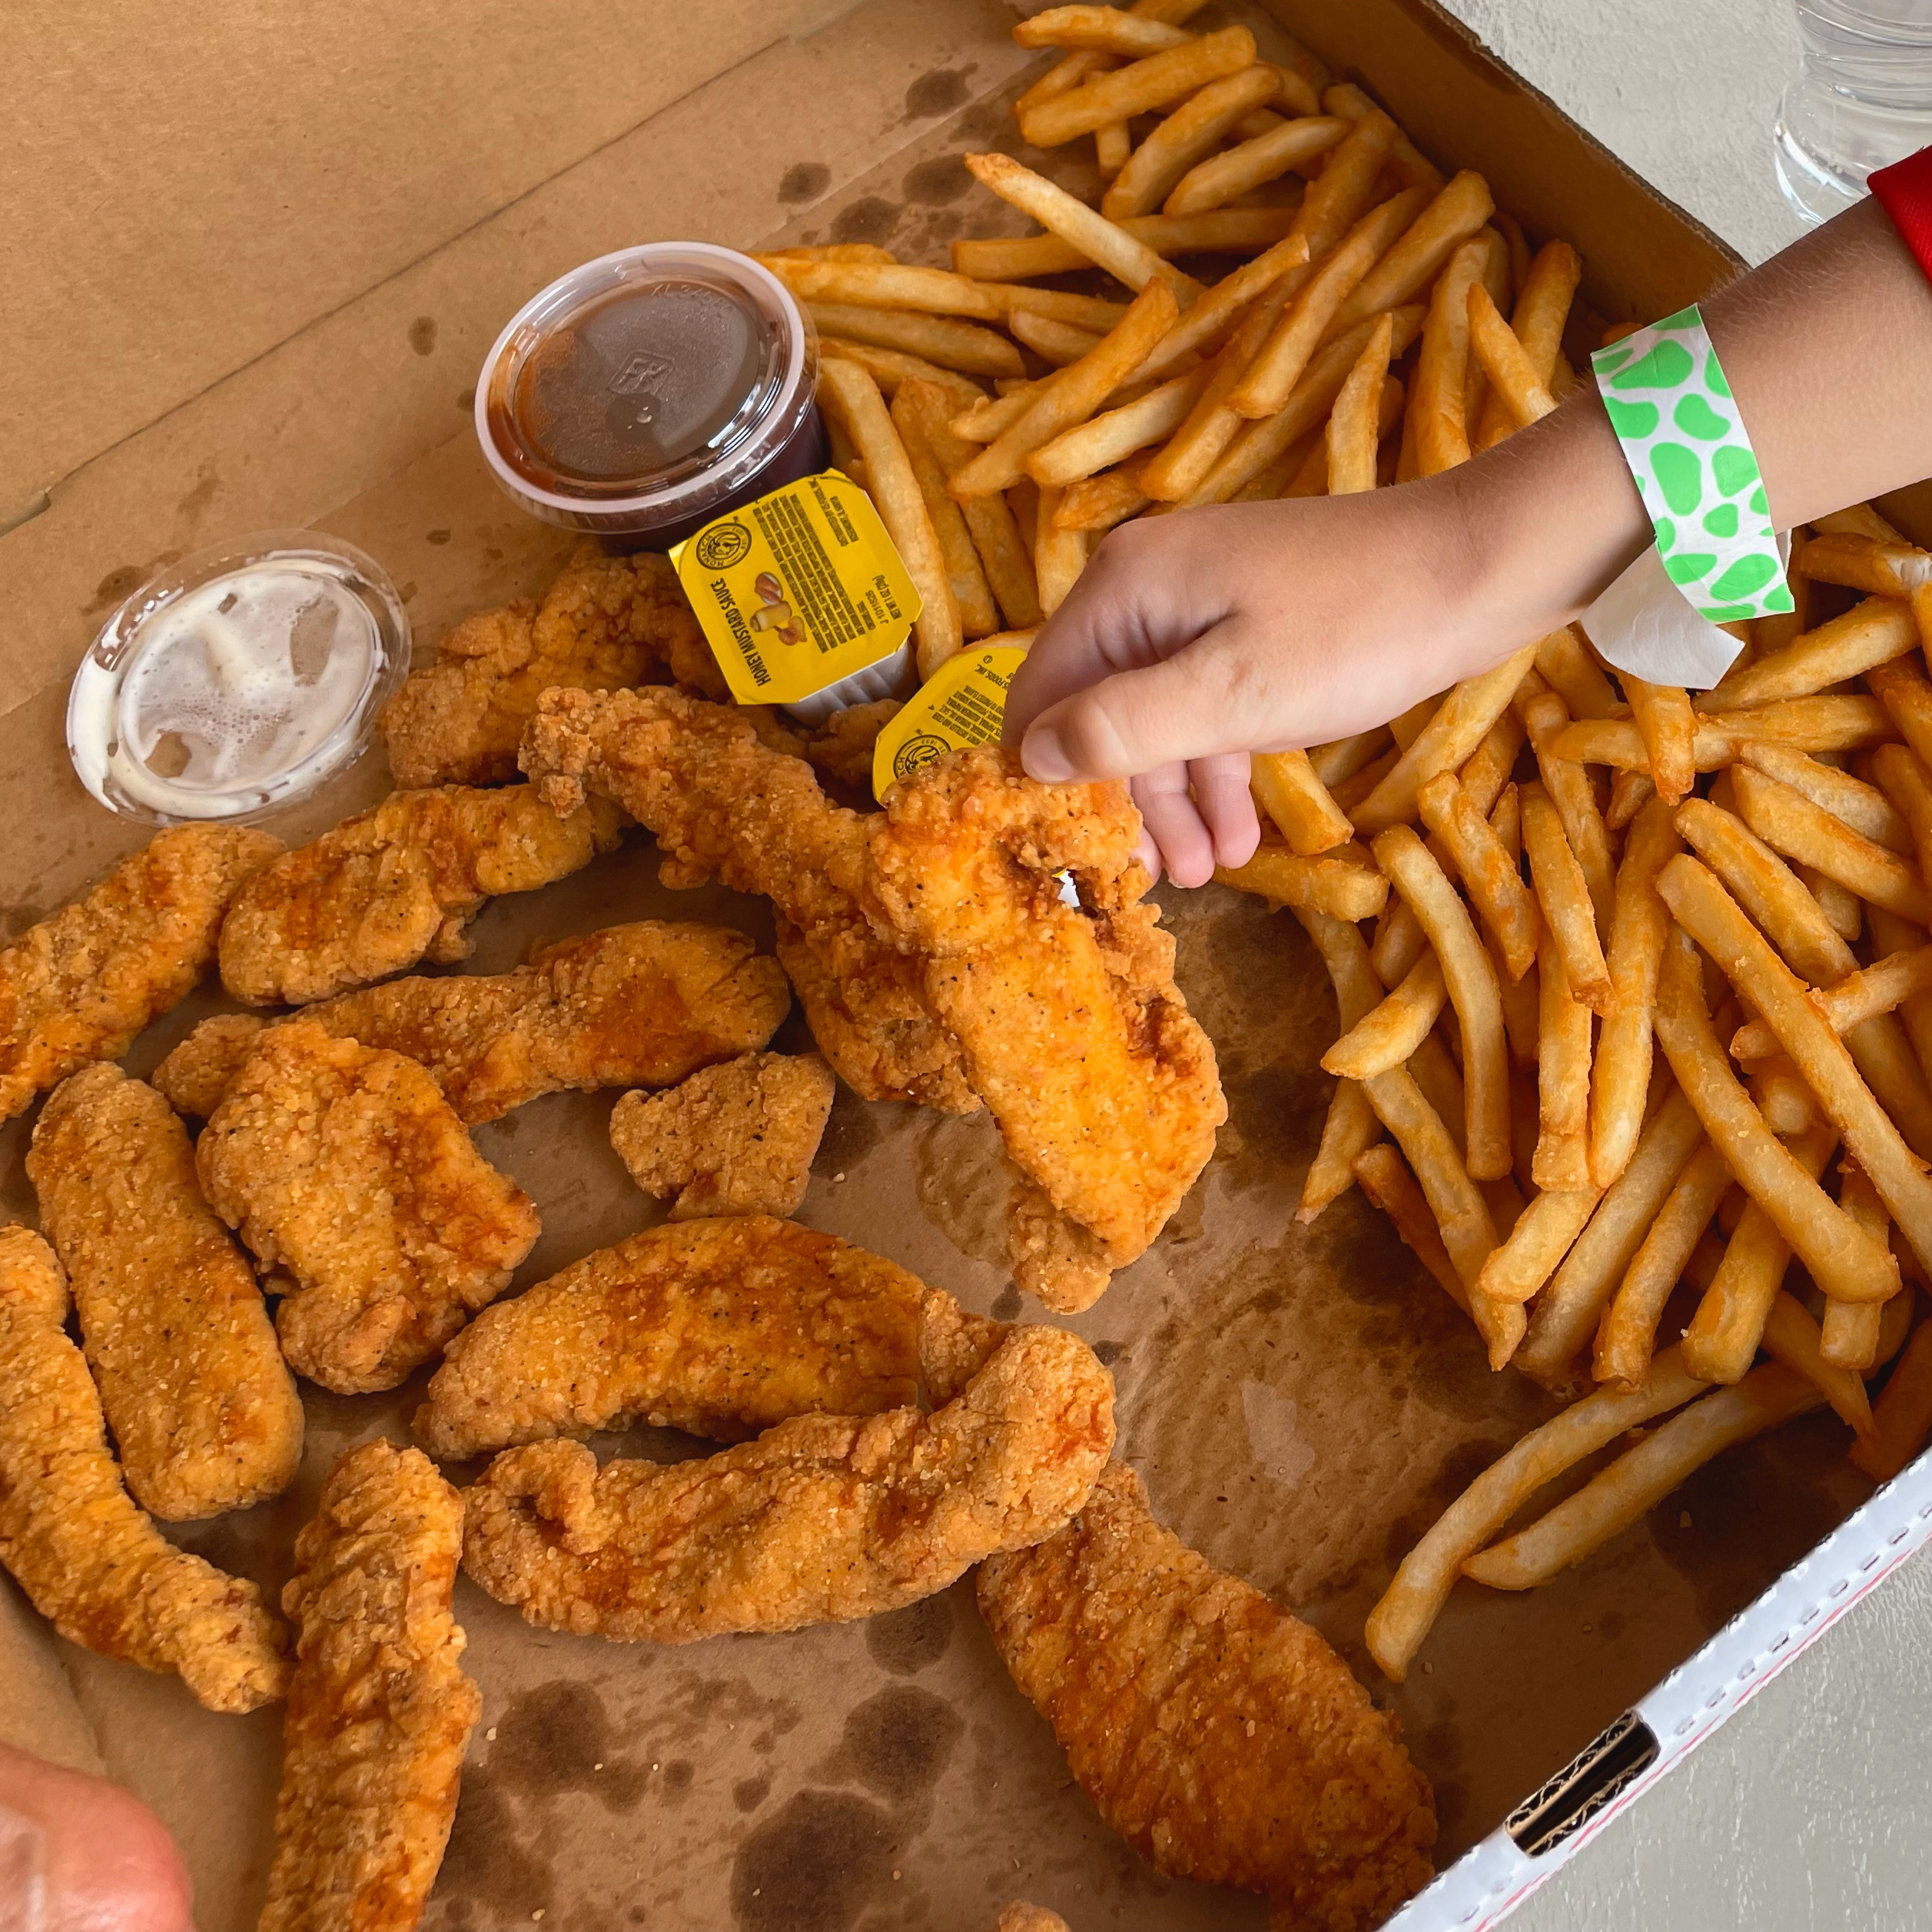 A Cabana meal service order of chicken tenders.